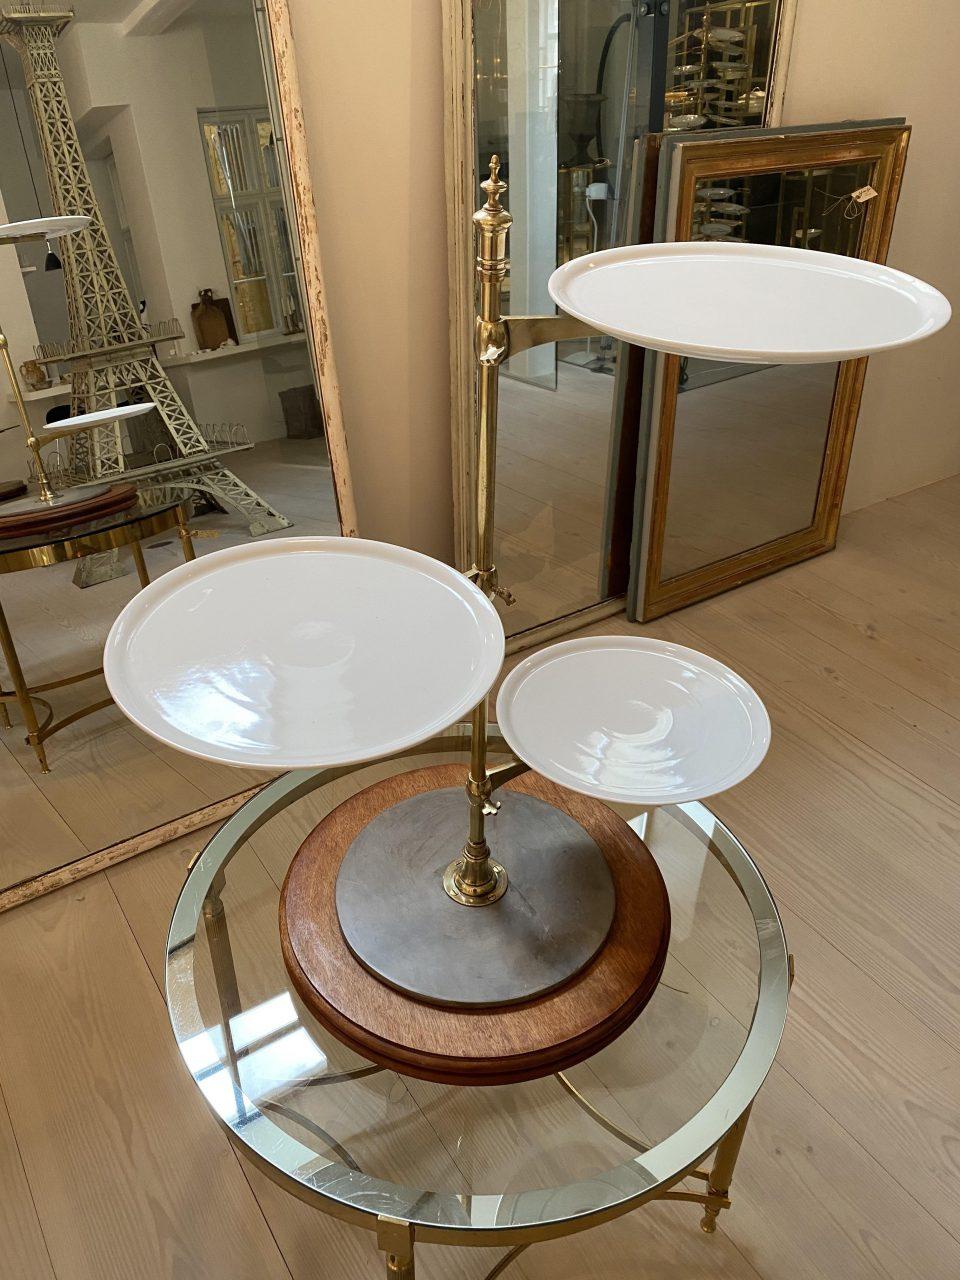 Beautiful and high quality brass stand /shelving, with a sleek elegant look. On a handsome round wooden base. Each of the round disc shelves are white porcelain plates. Wonderful piece for display purposes. An old French confectionary étagère from a